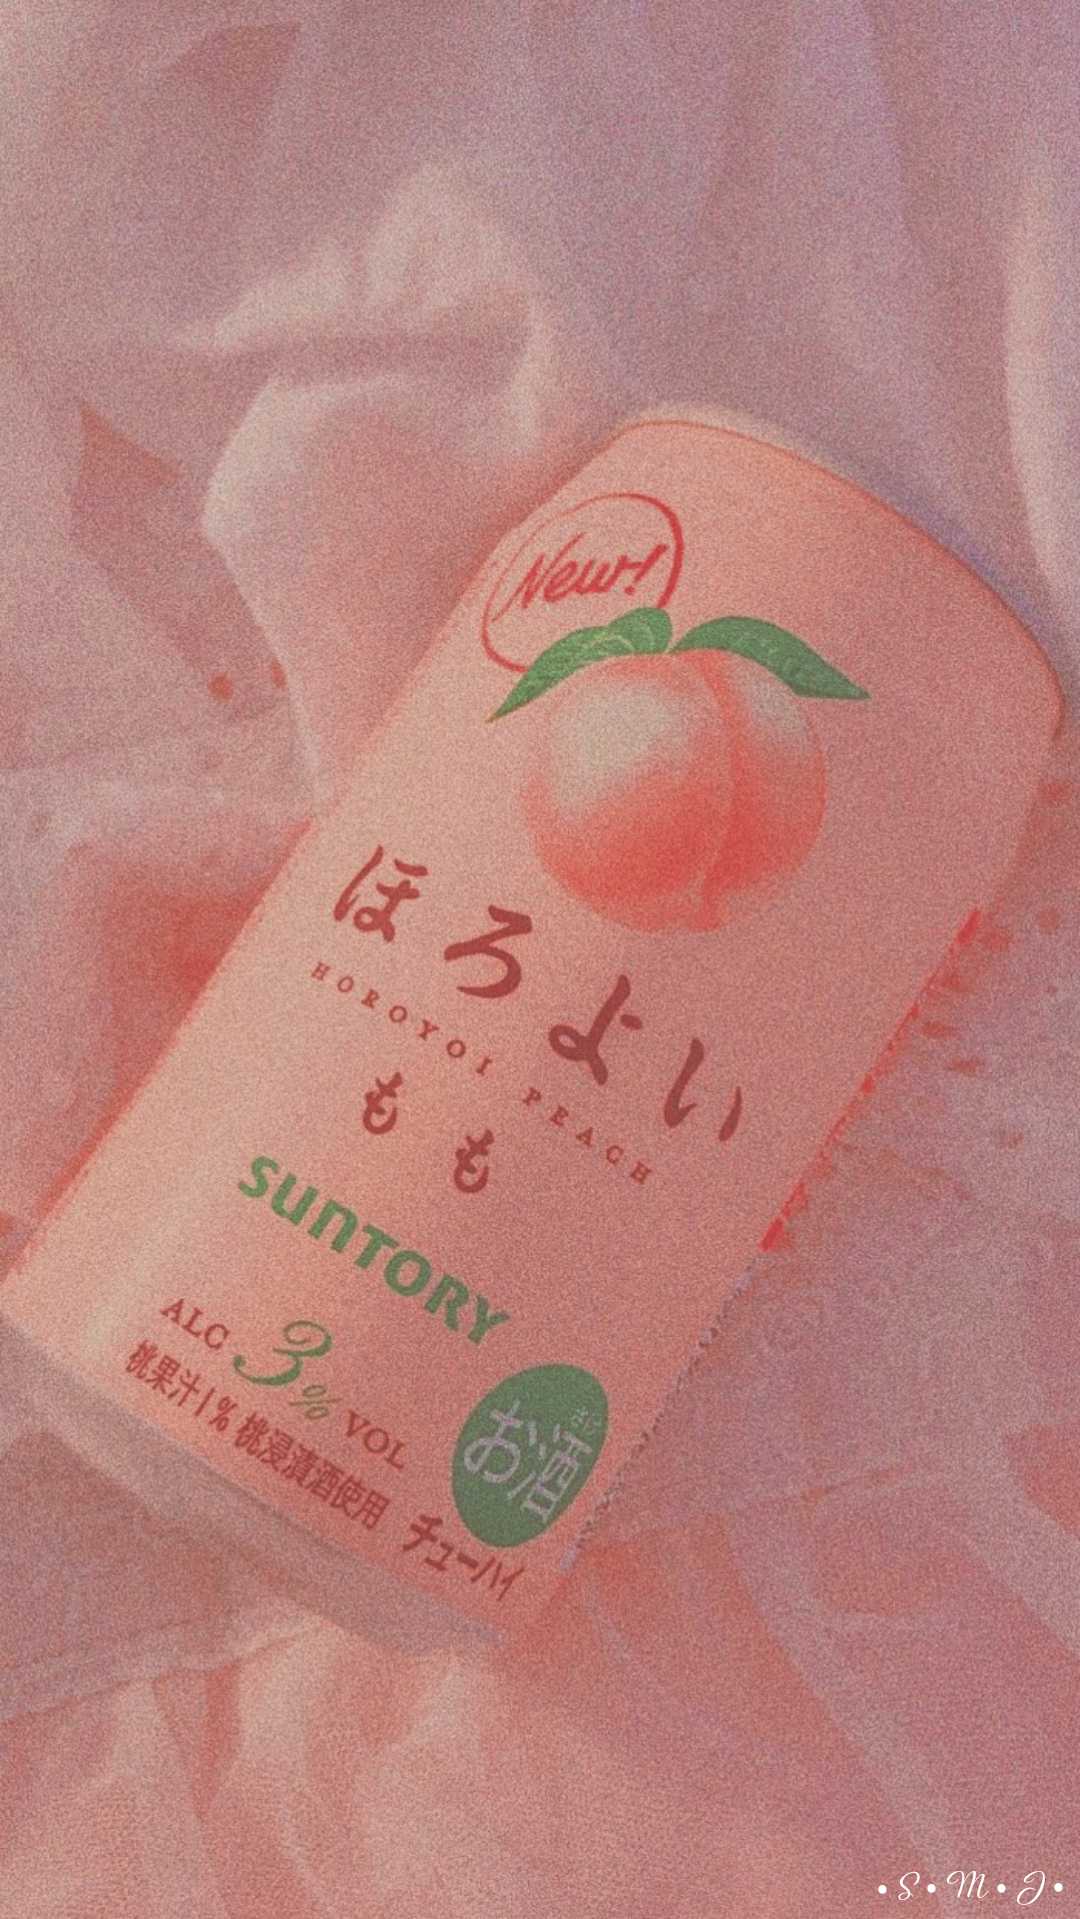 A pink drink with an asian label - Peach